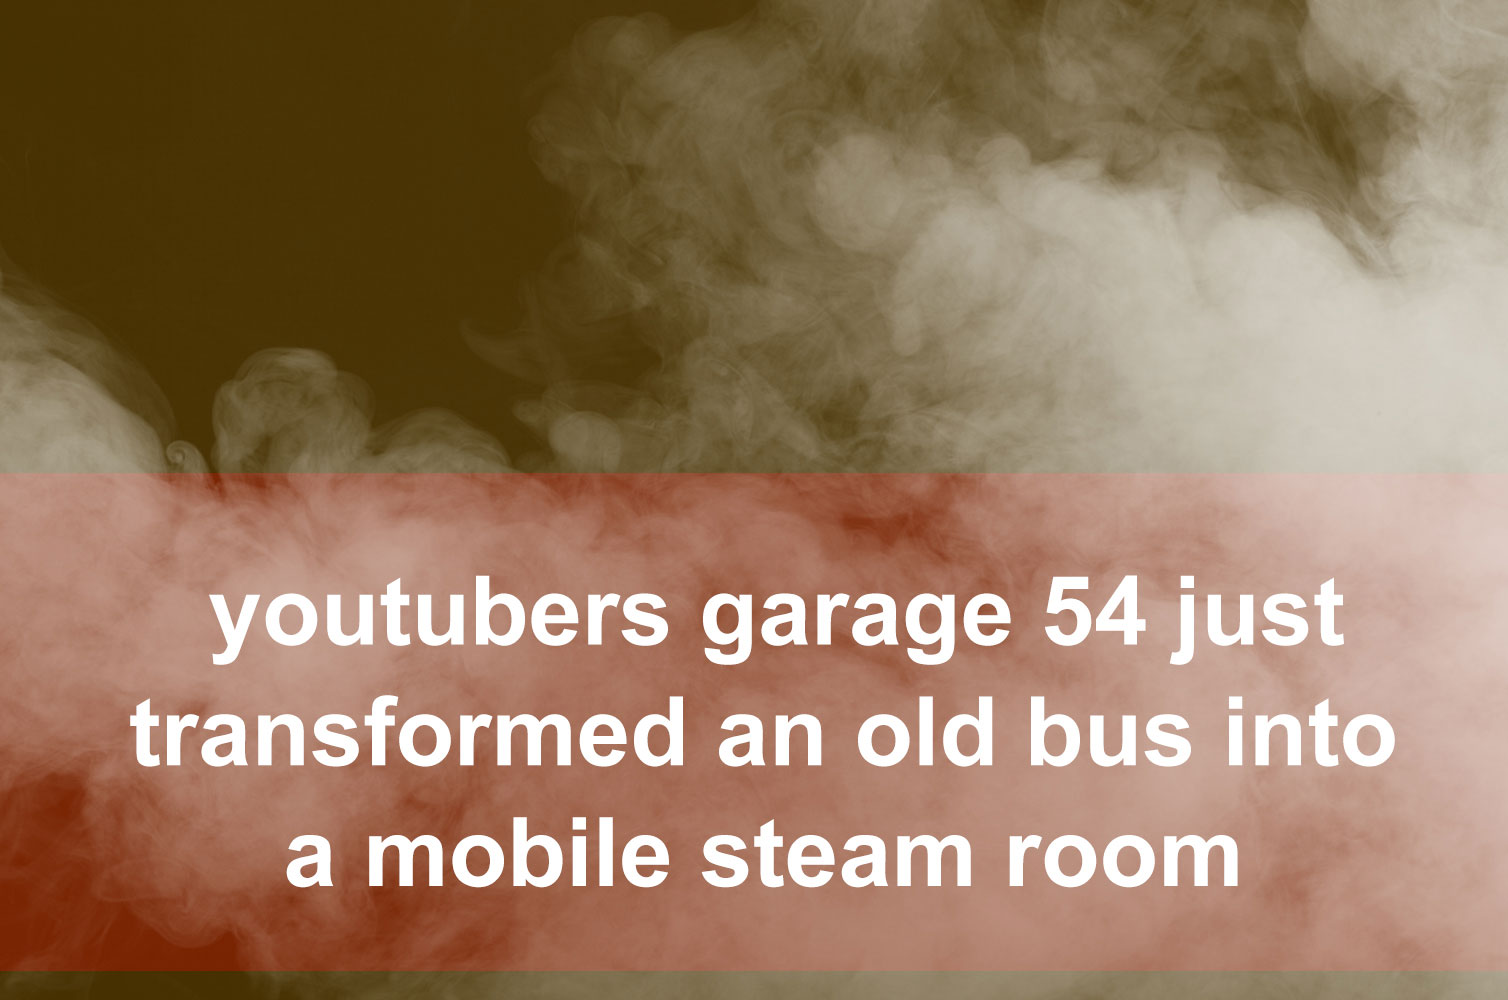 YouTubers Garage 54 just Transformed an old Bus into a Mobile Steam Room